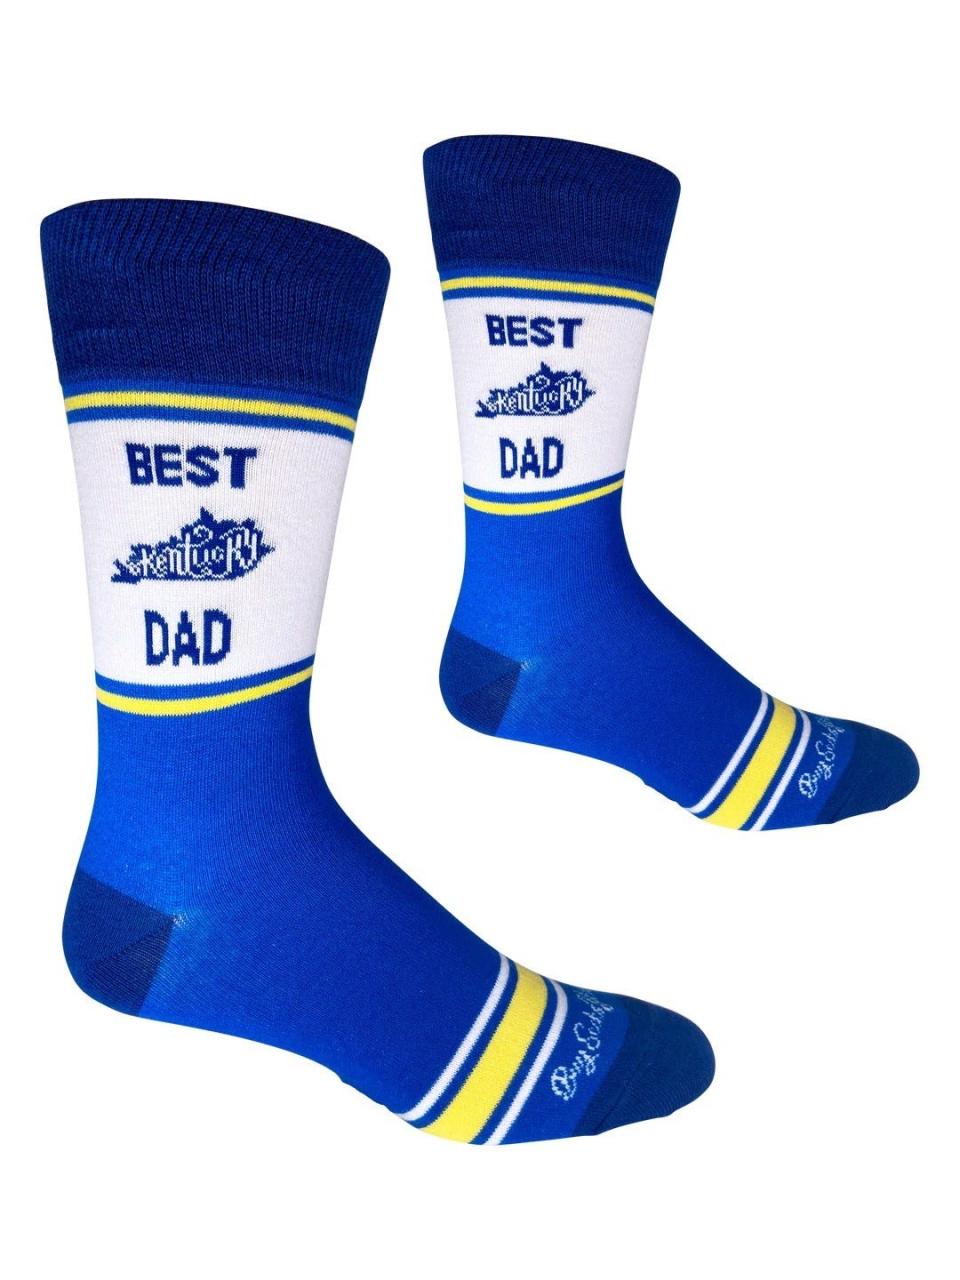 The "Buy Socks You All" brand is created by Work the Metal owner Jack Mathis.  Work the Metal is the shop where the socks are sold.  These are specific to Father's Day but you'll find more than a dozen other Kentucky related designs from bourbon to beer to "Gettin' Lucky in Kentucky." Cost: $12 per pair